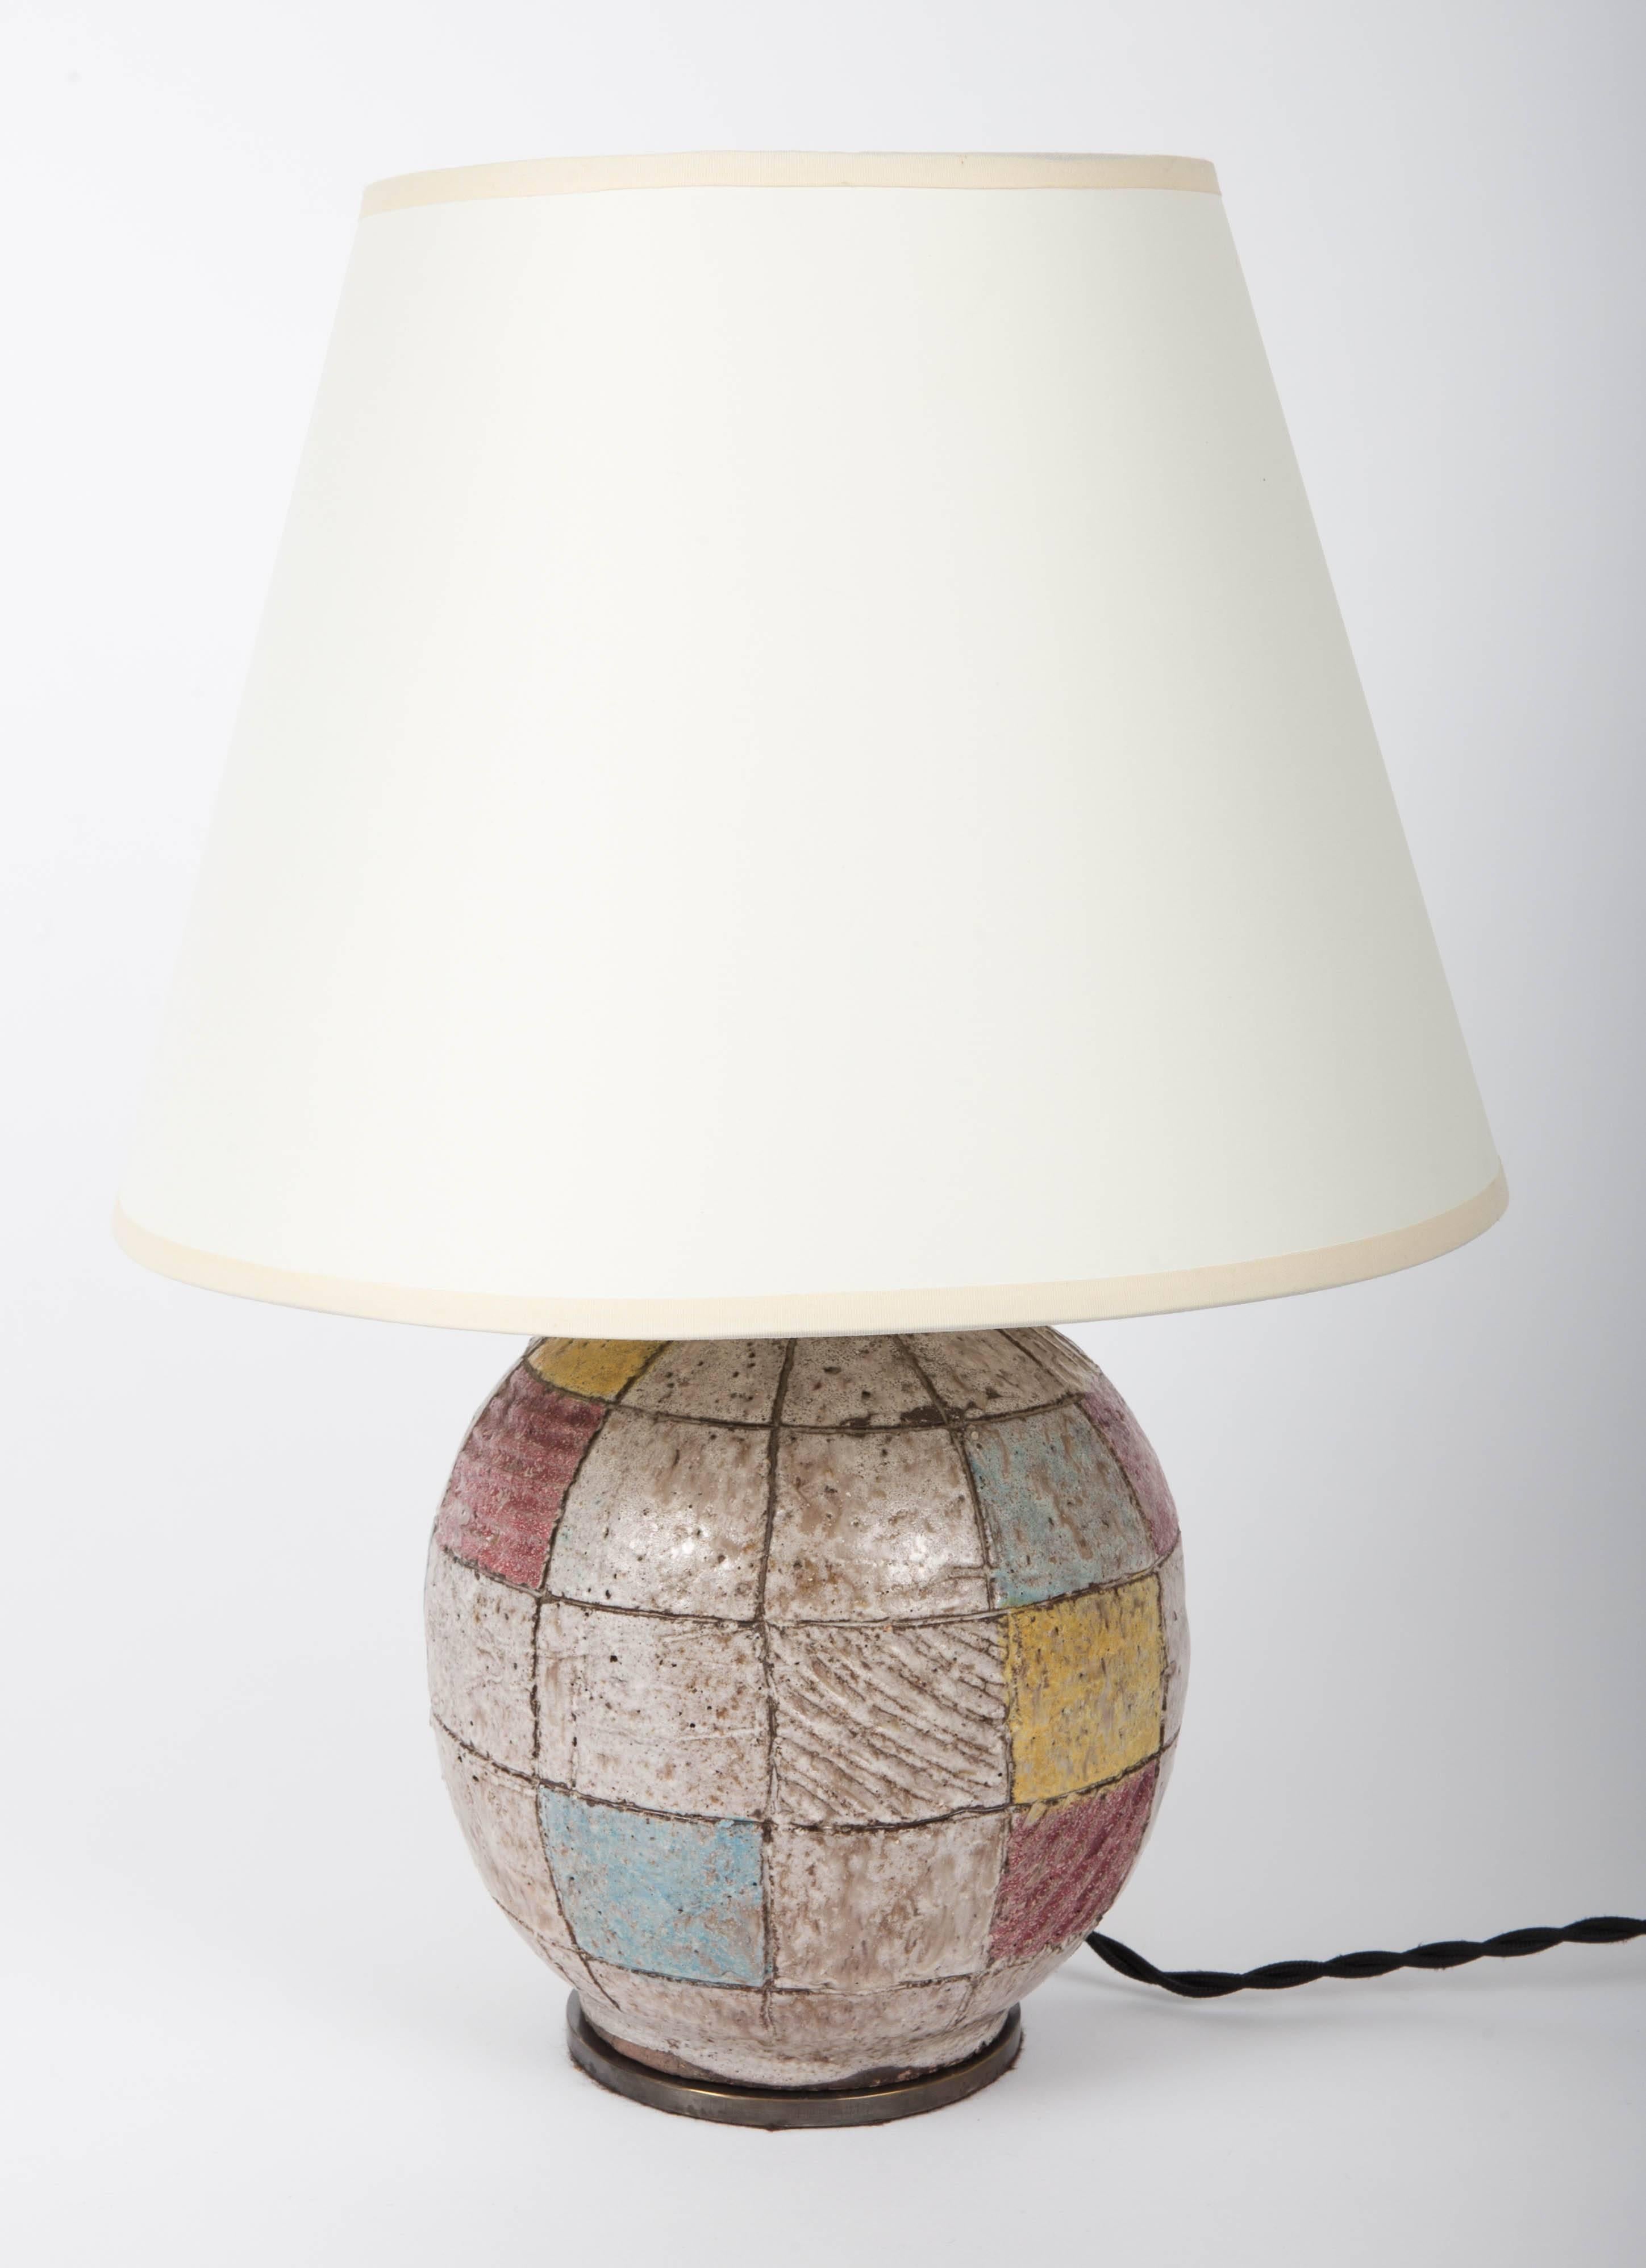 Red, white, yellow and blue color block lamp by Bitossi.